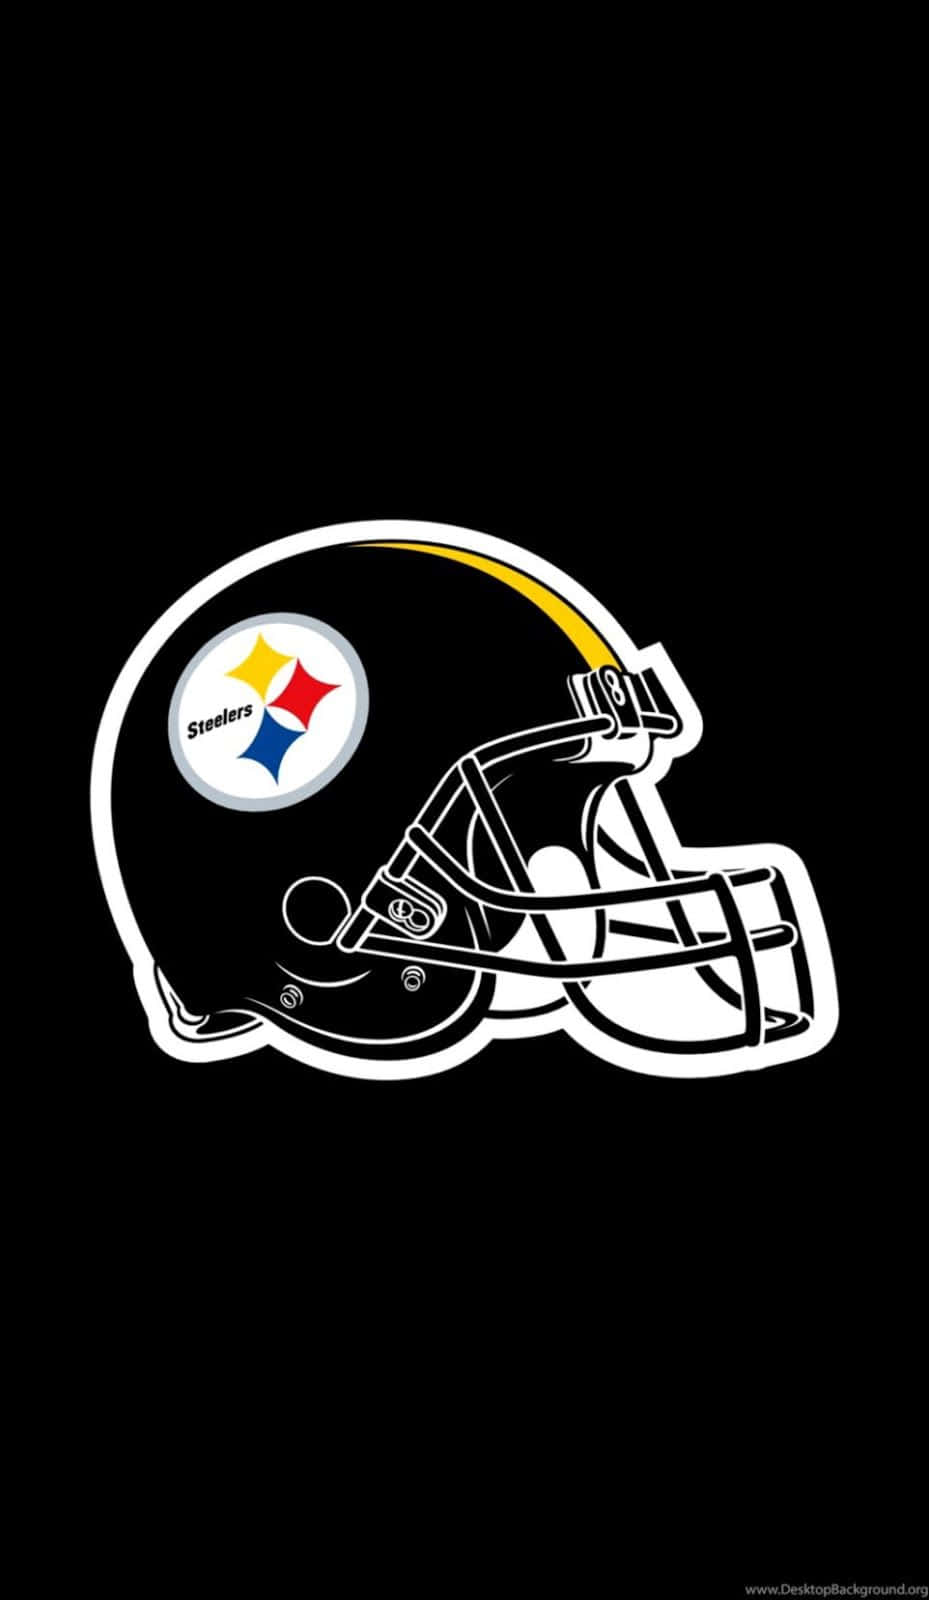 An iconic Pittsburgh Steelers logo, proudly displayed Wallpaper